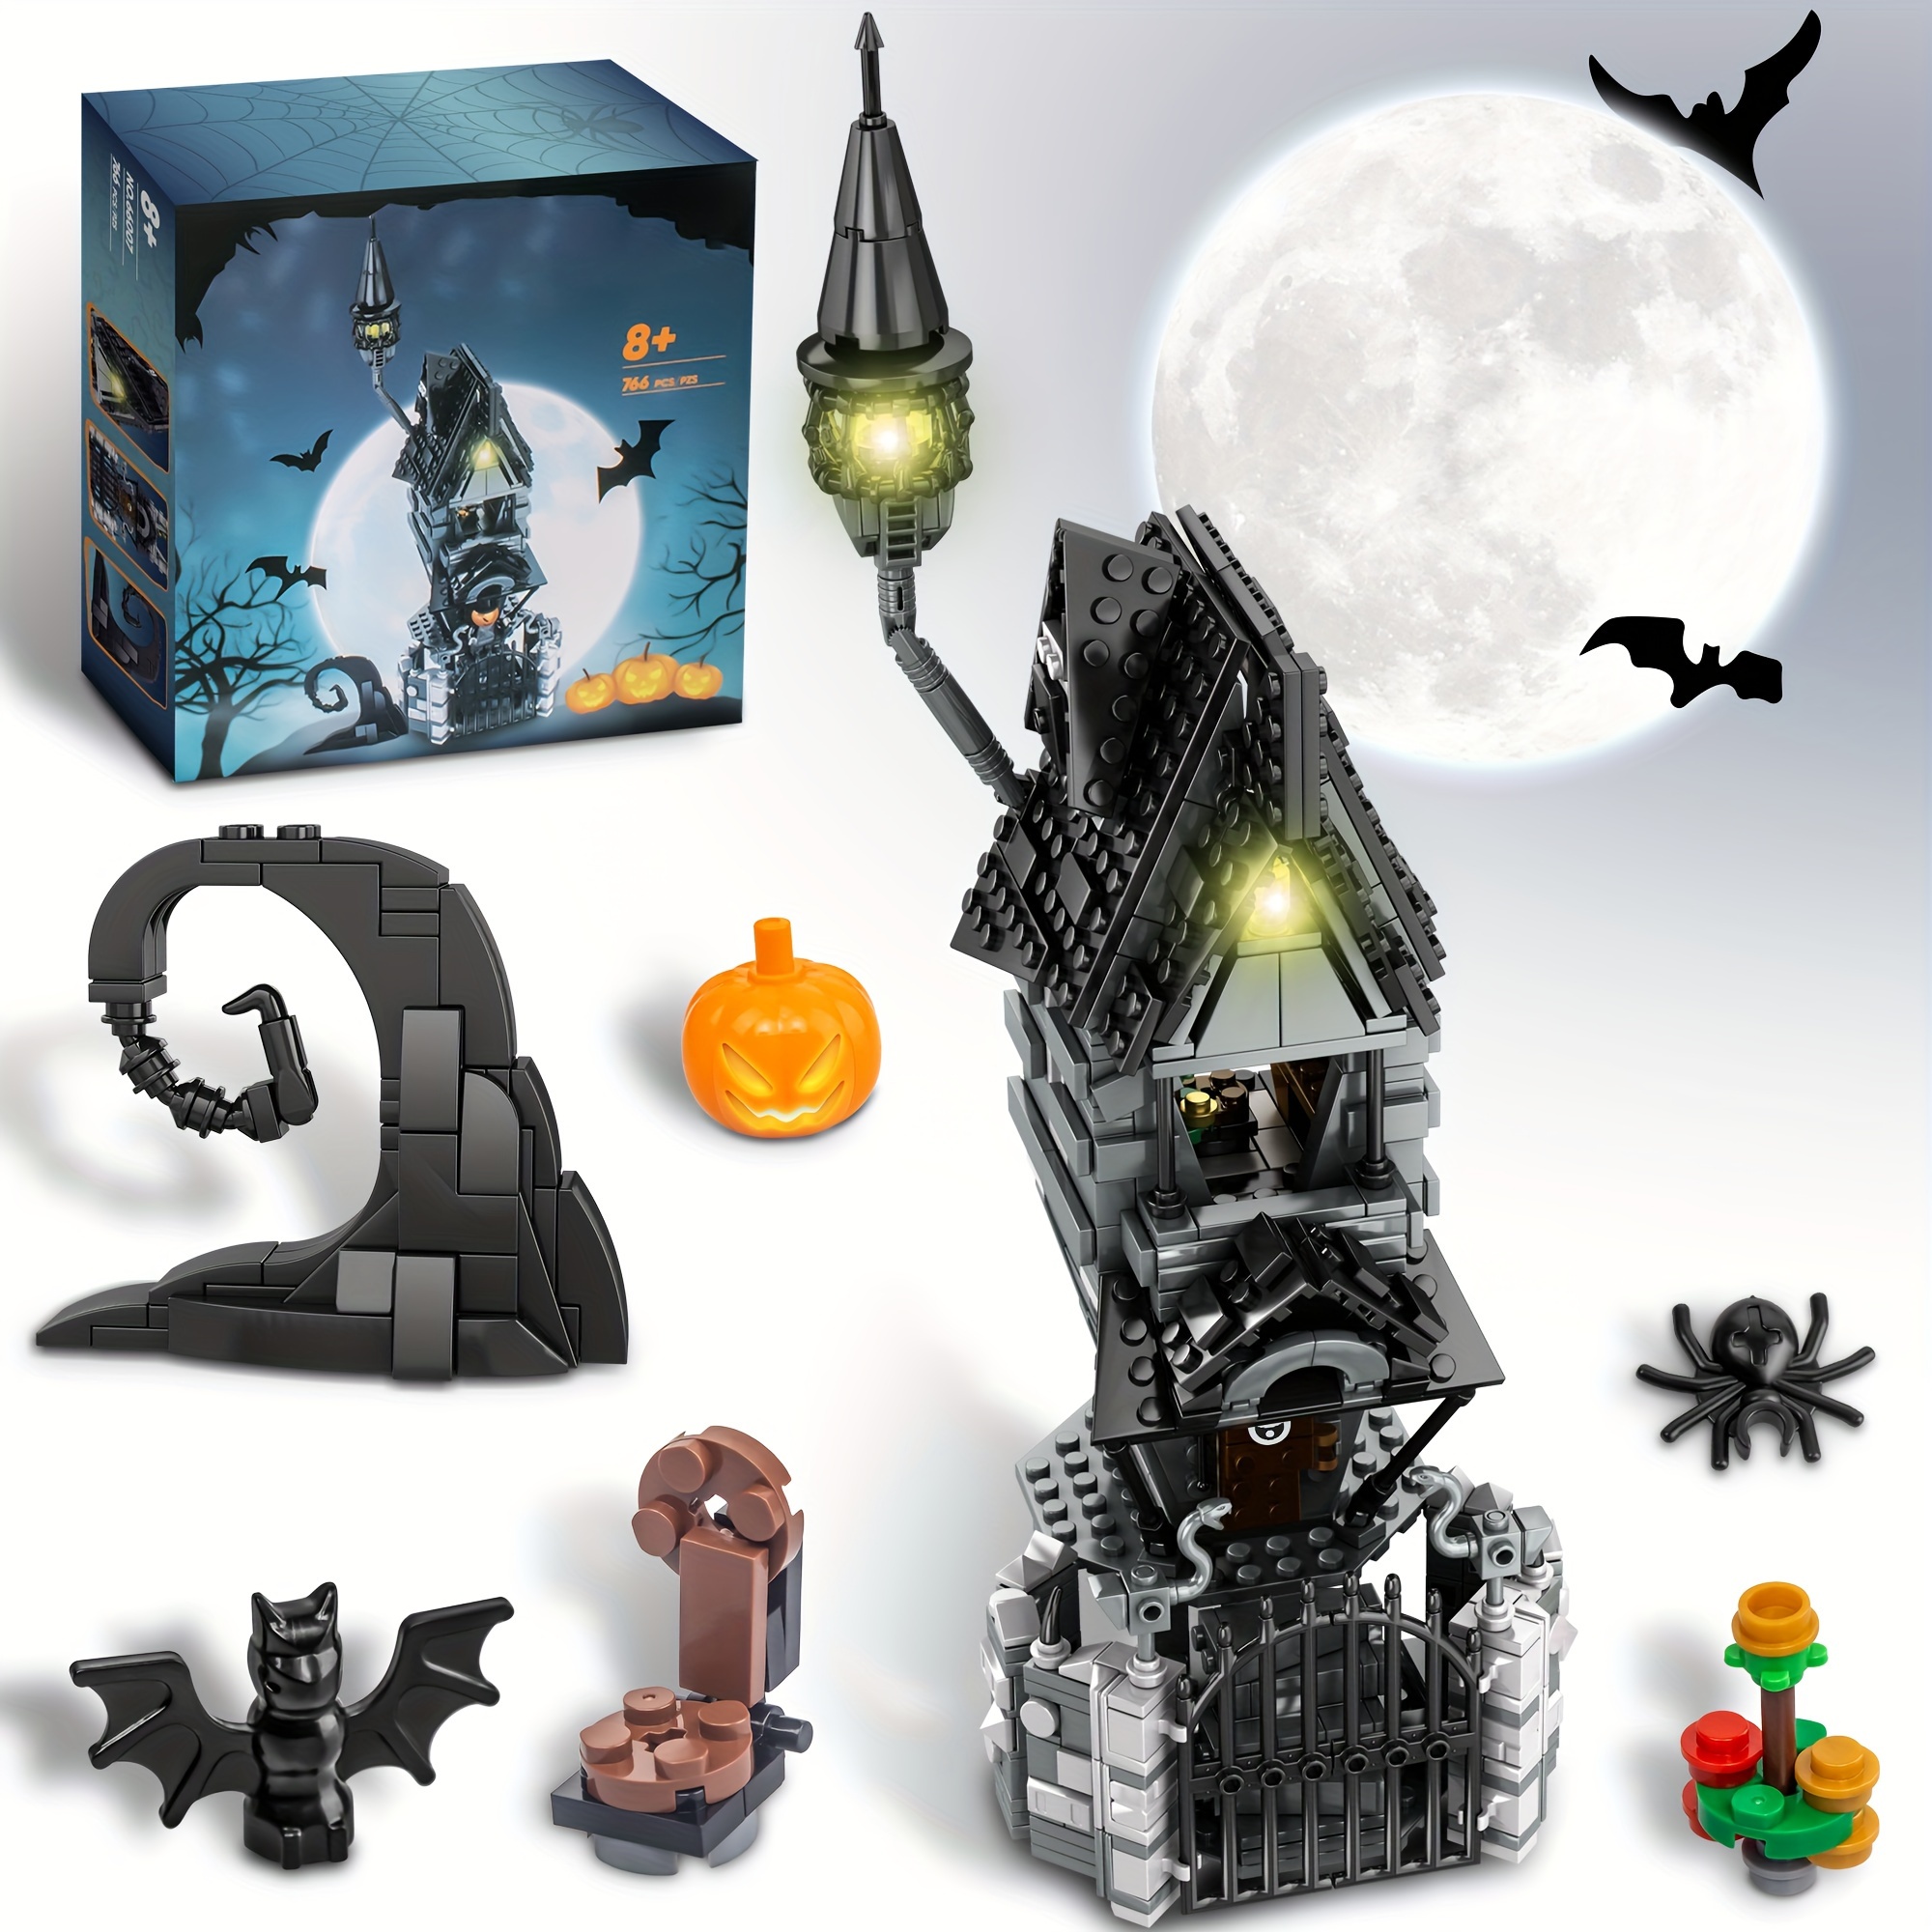  Nightmare Before Christmas Jack's and Sally Haunted House  Building Set with Led Light Compatible for Lego,Creative Festival Toy Kit  for Movie Fans Friends Kids(568pcs) : Toys & Games